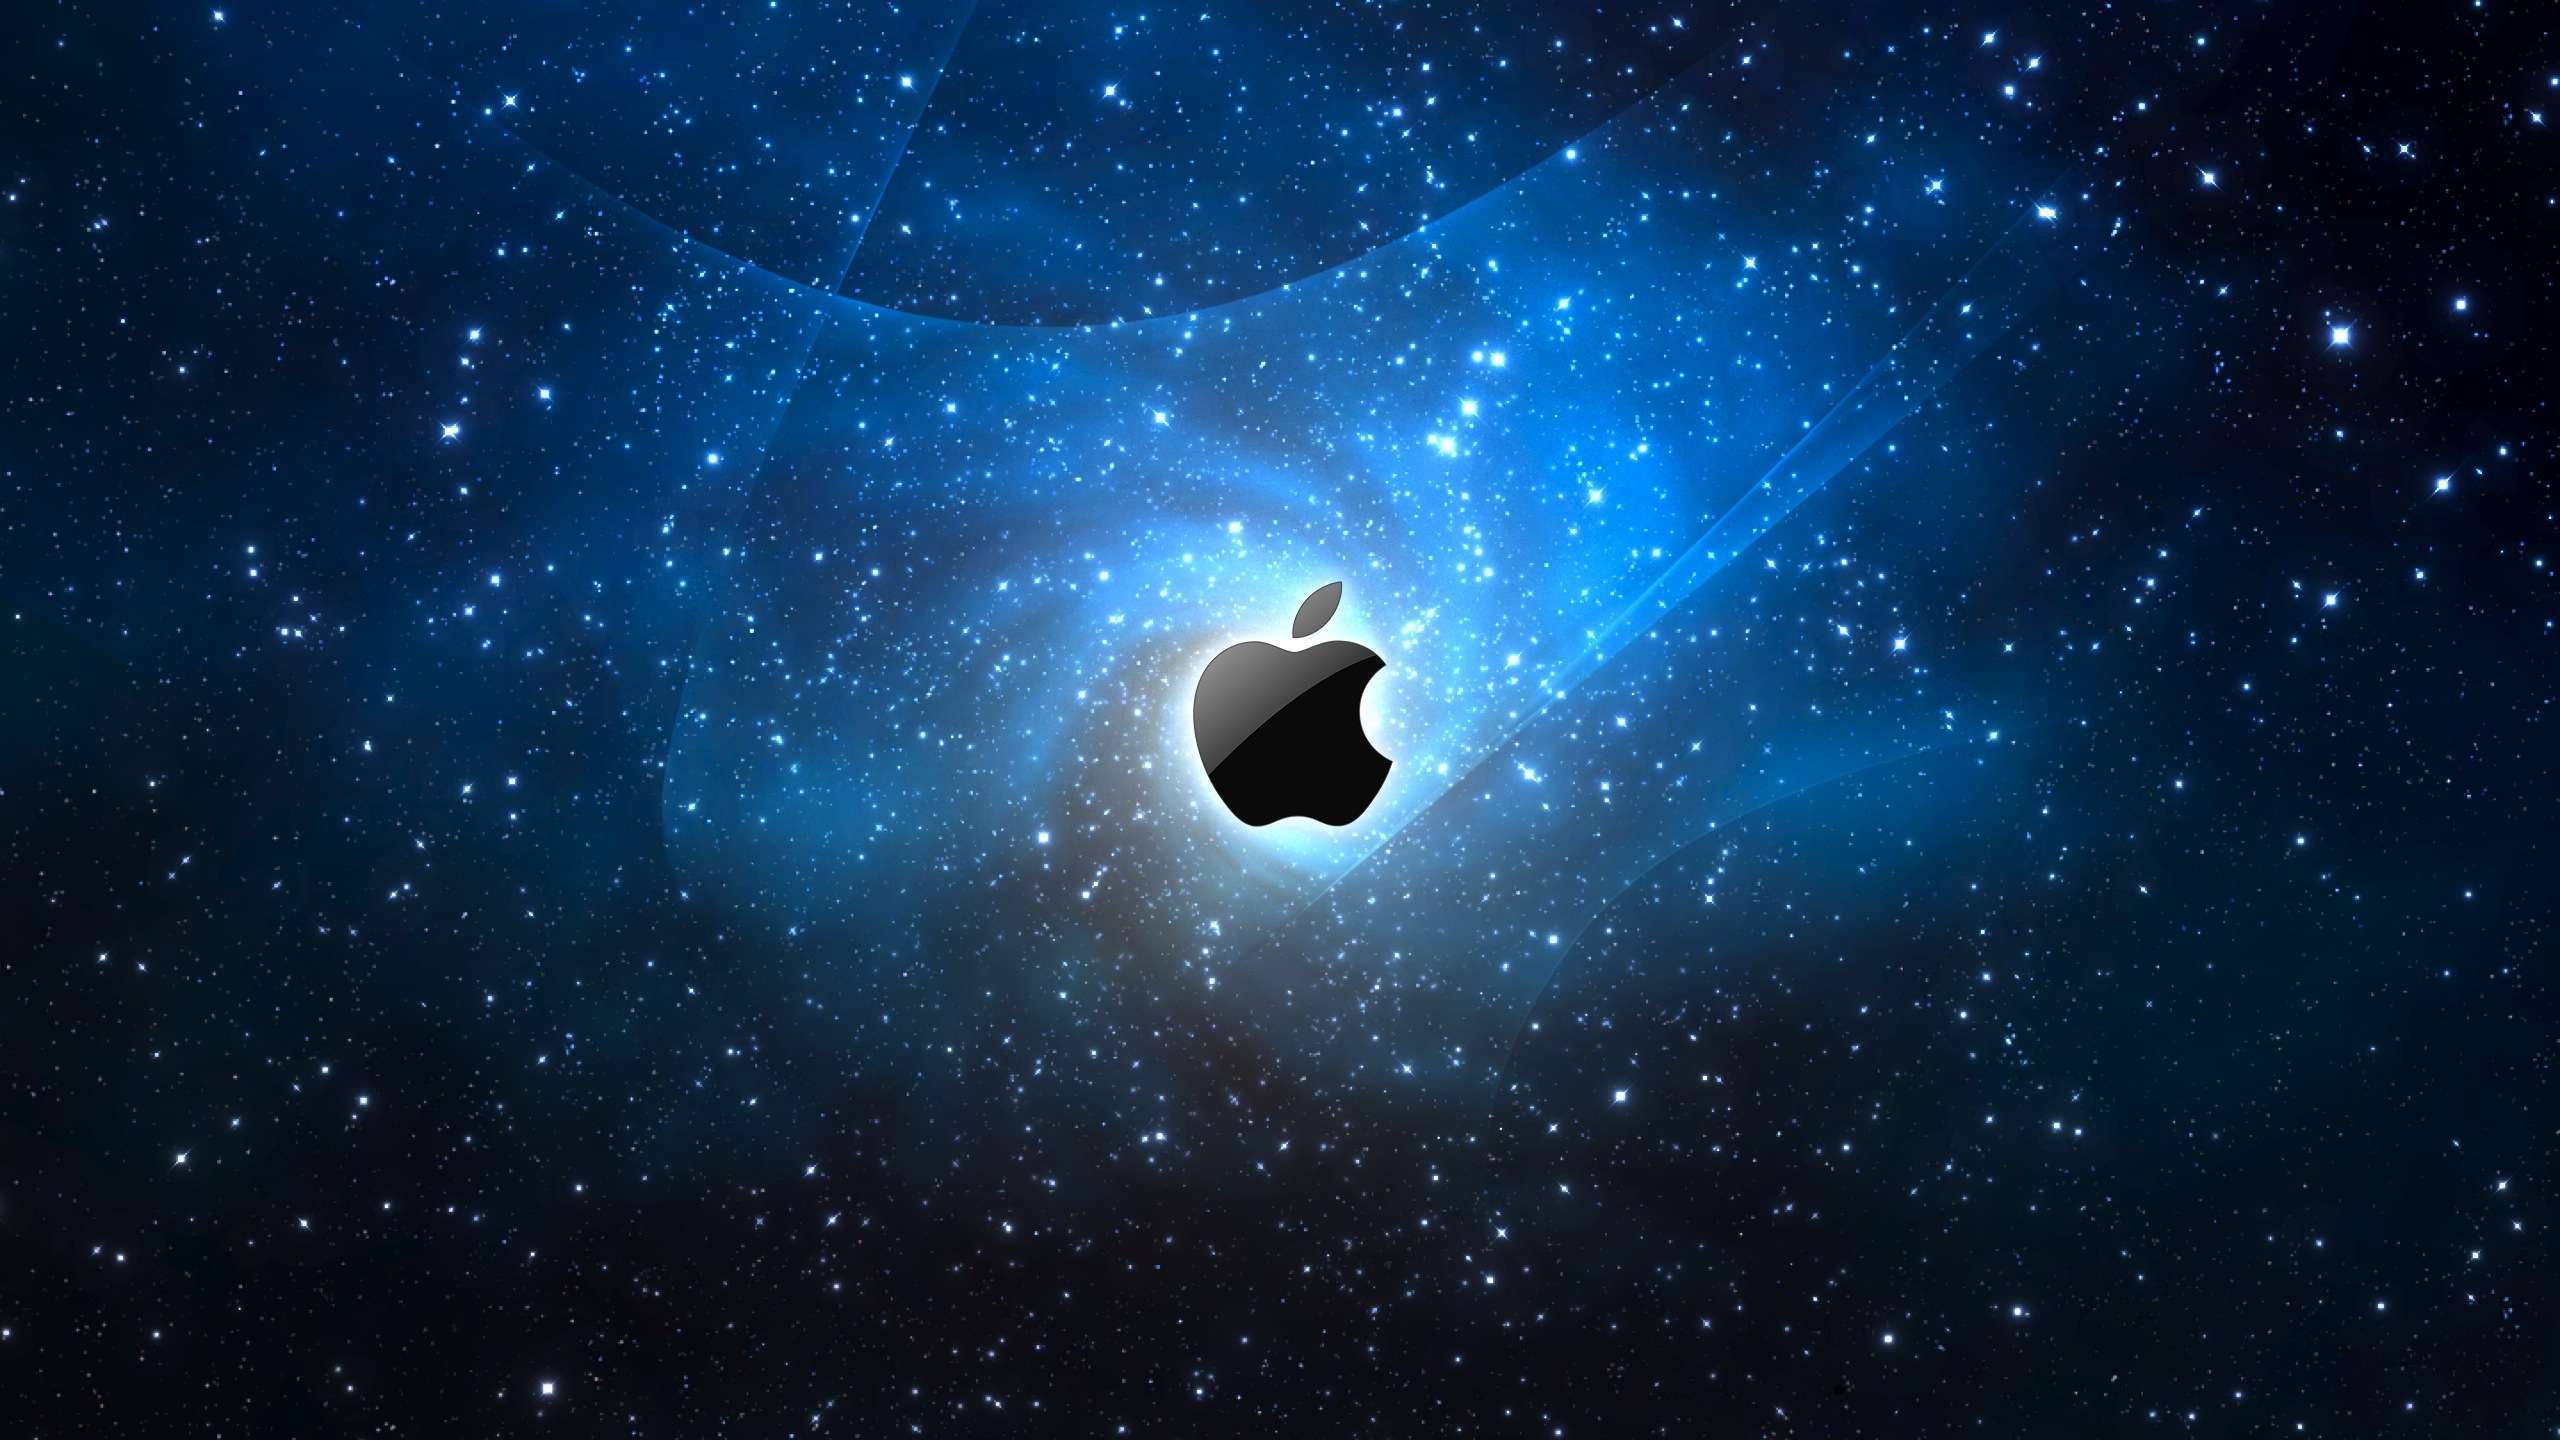 Wallpapers for apple puters